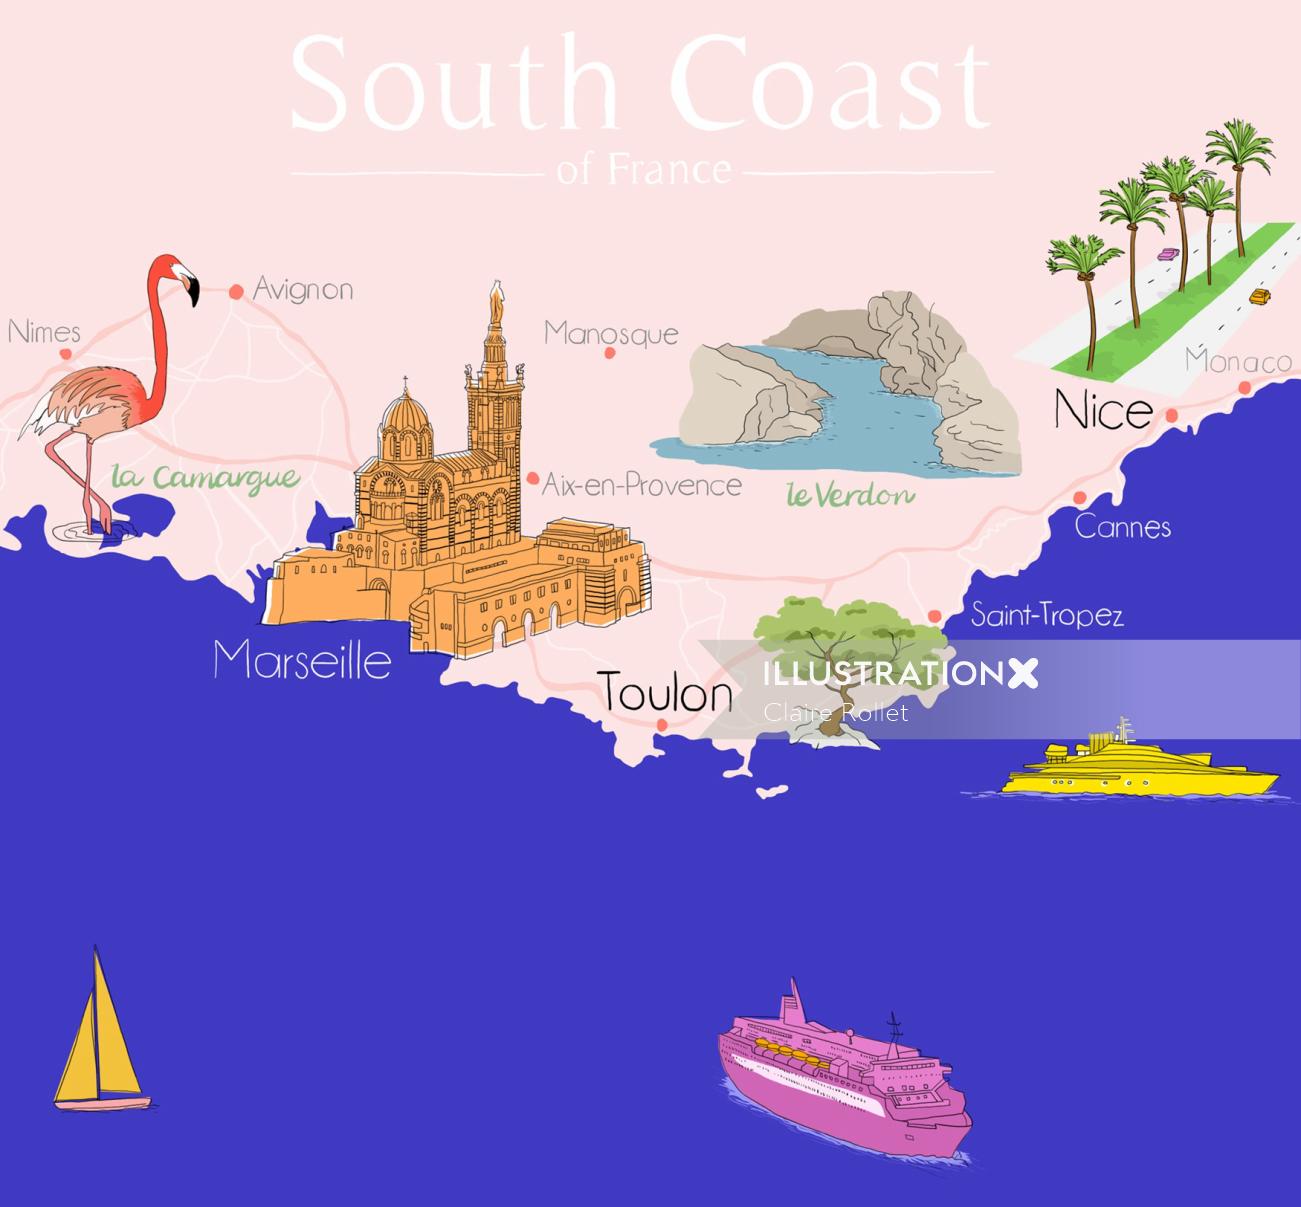 Map of France South Coast around Marseille and Nice illustrated by Claire Rollet